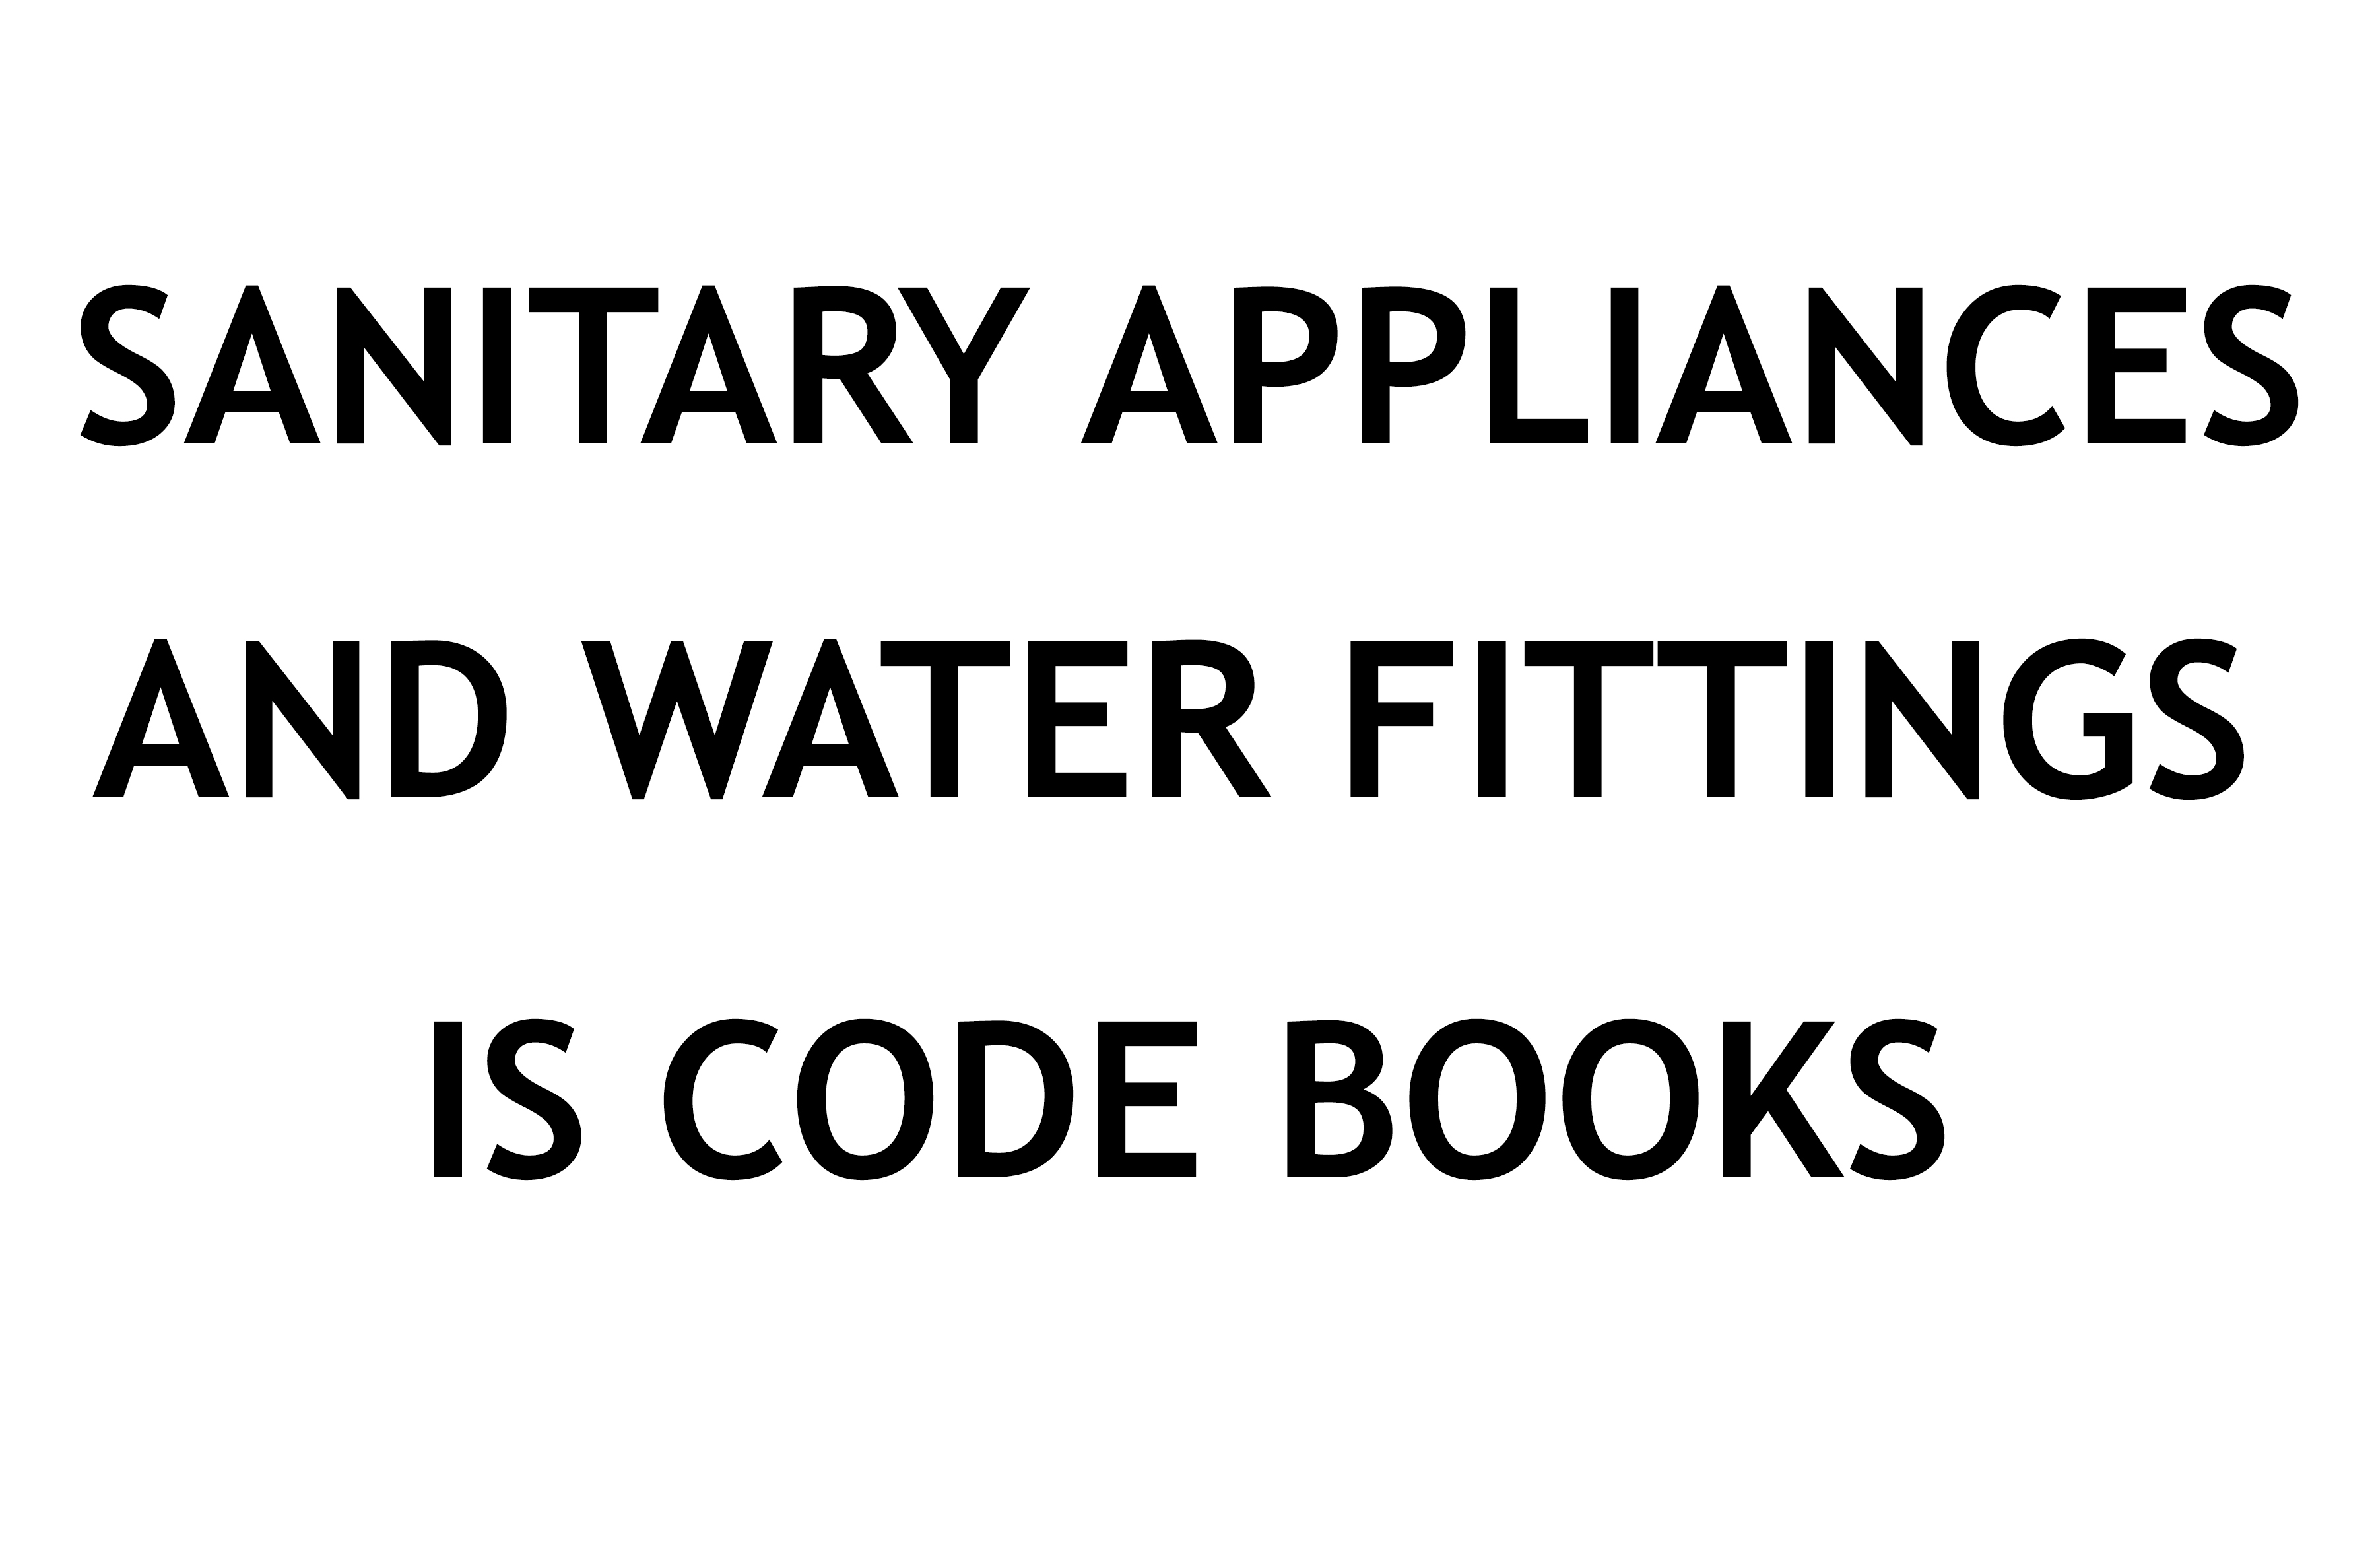 SANITARY APPLIANCES AND WATER FITTINGS INDIAN STANDARD CODE BOOKS FREE DOWNLOAD PDF CIVILENGGFORALL